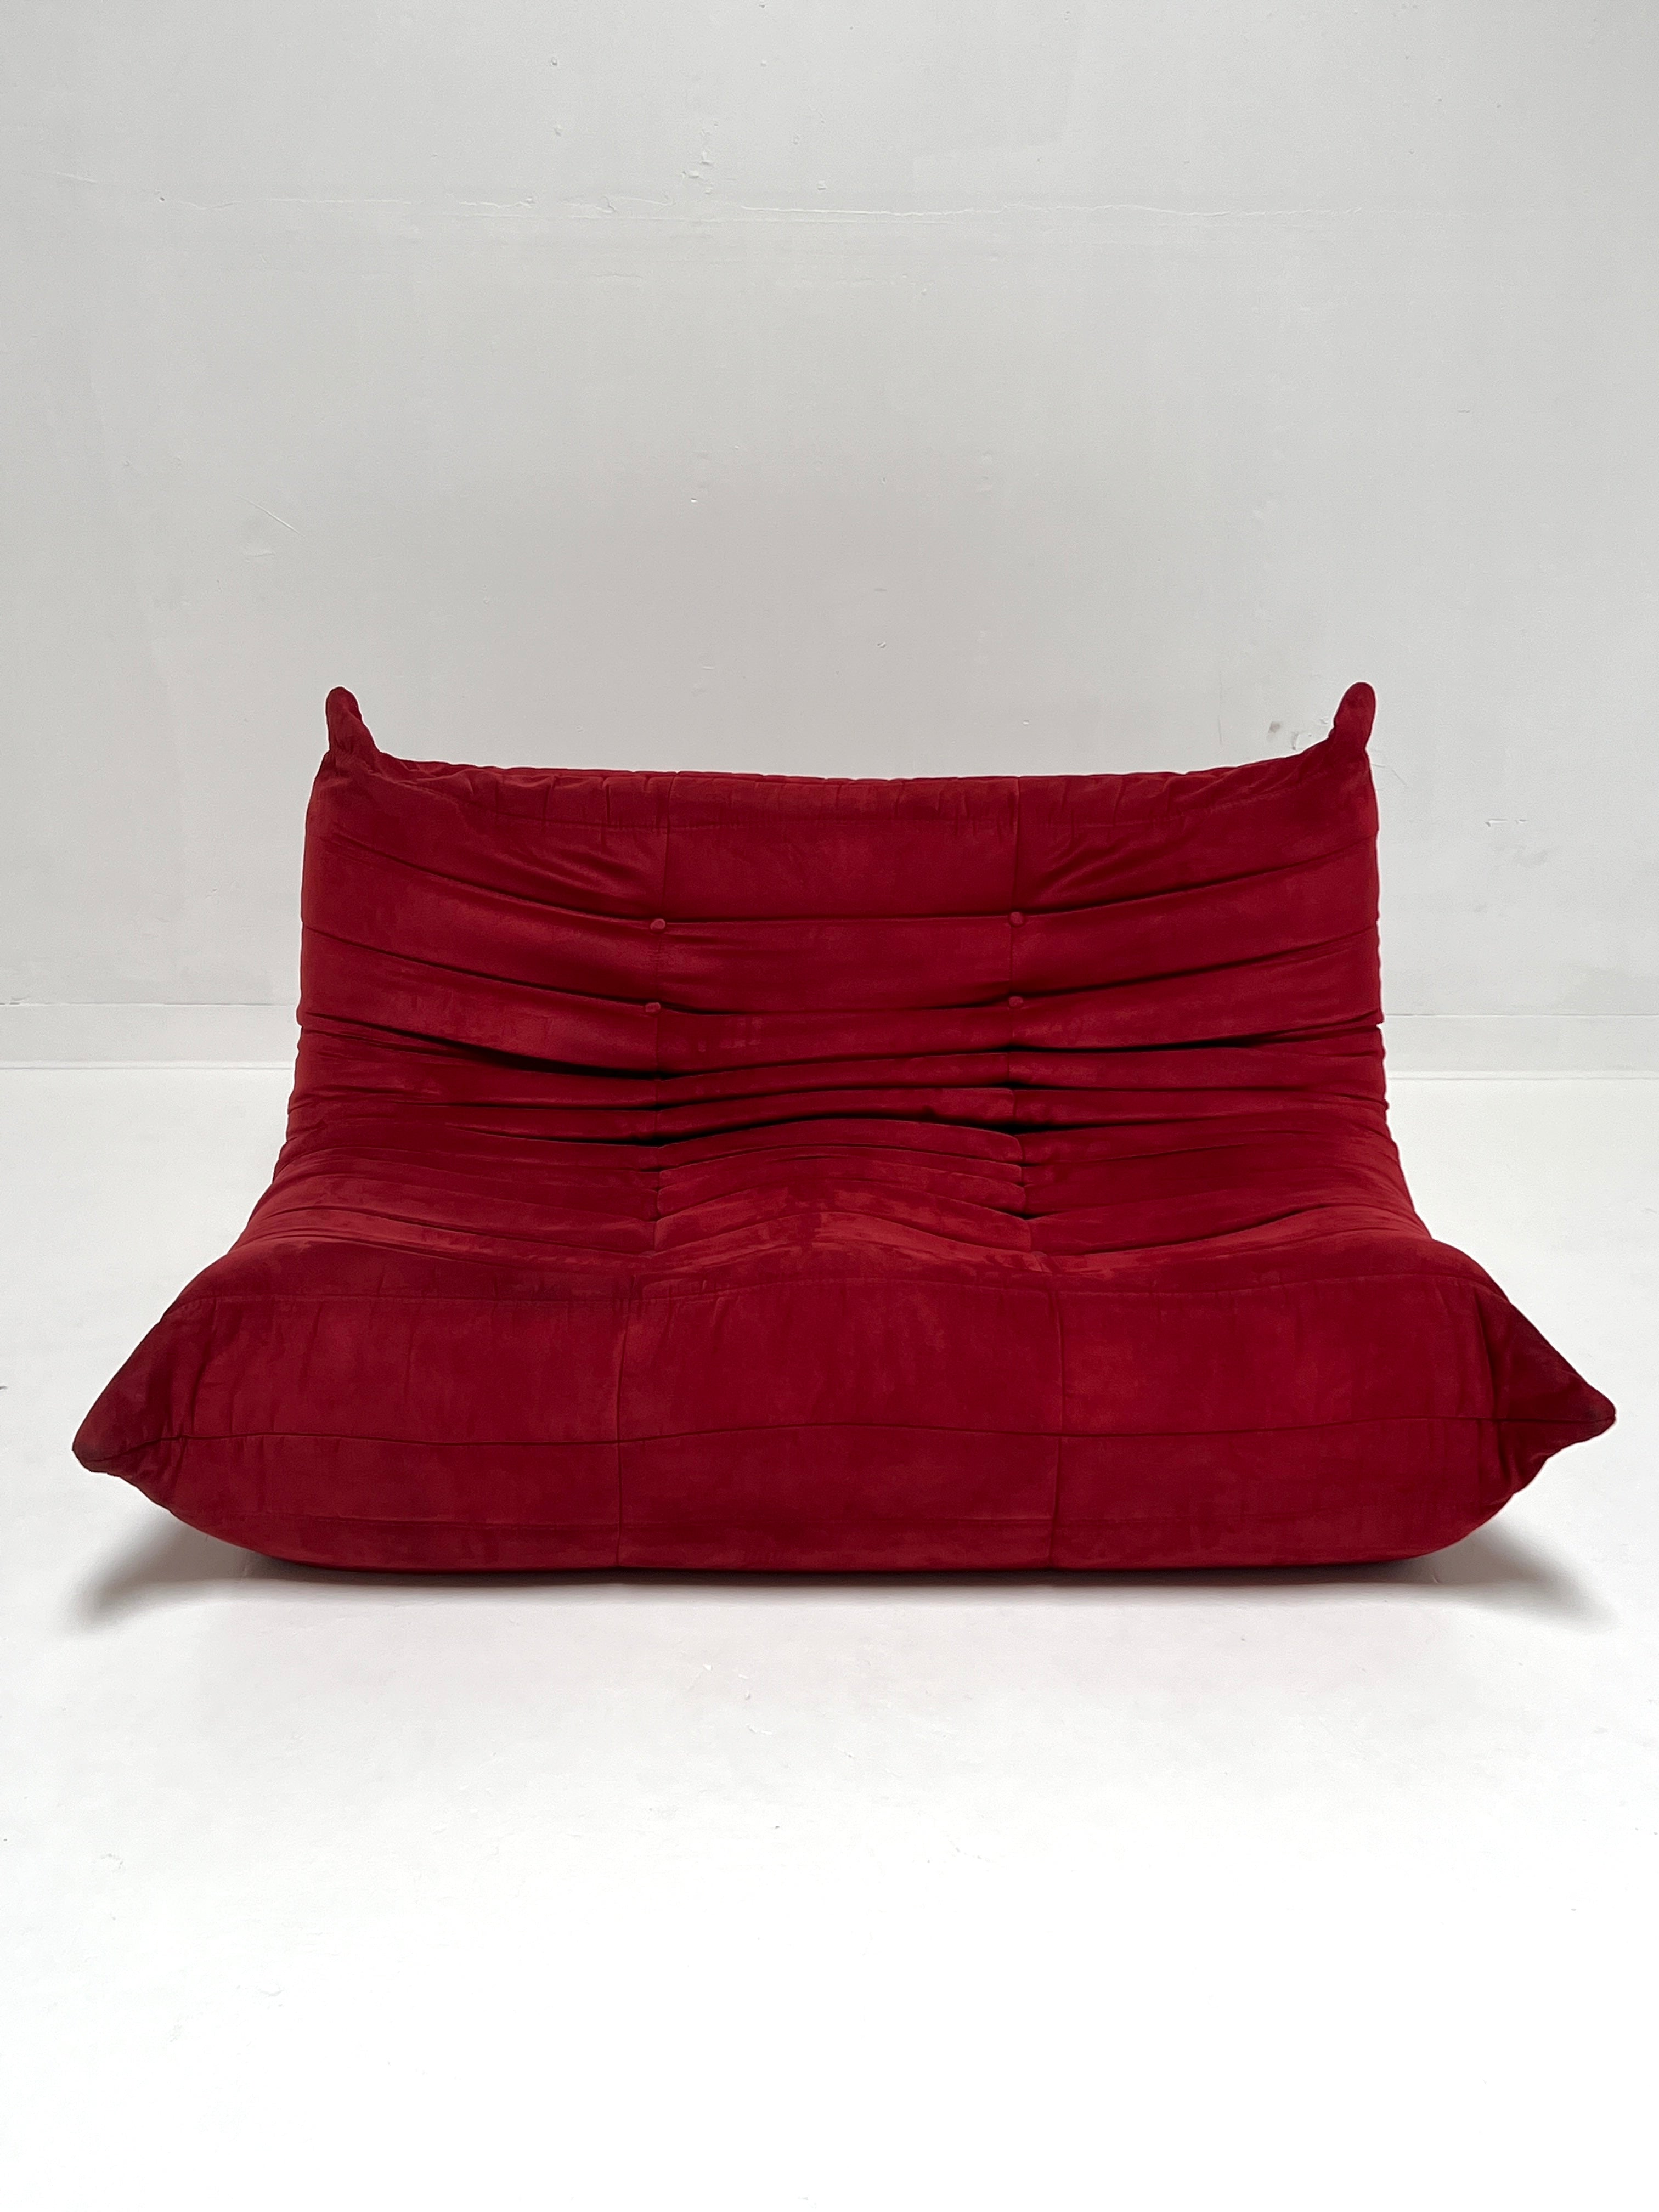 Red Togo Style Loveseat